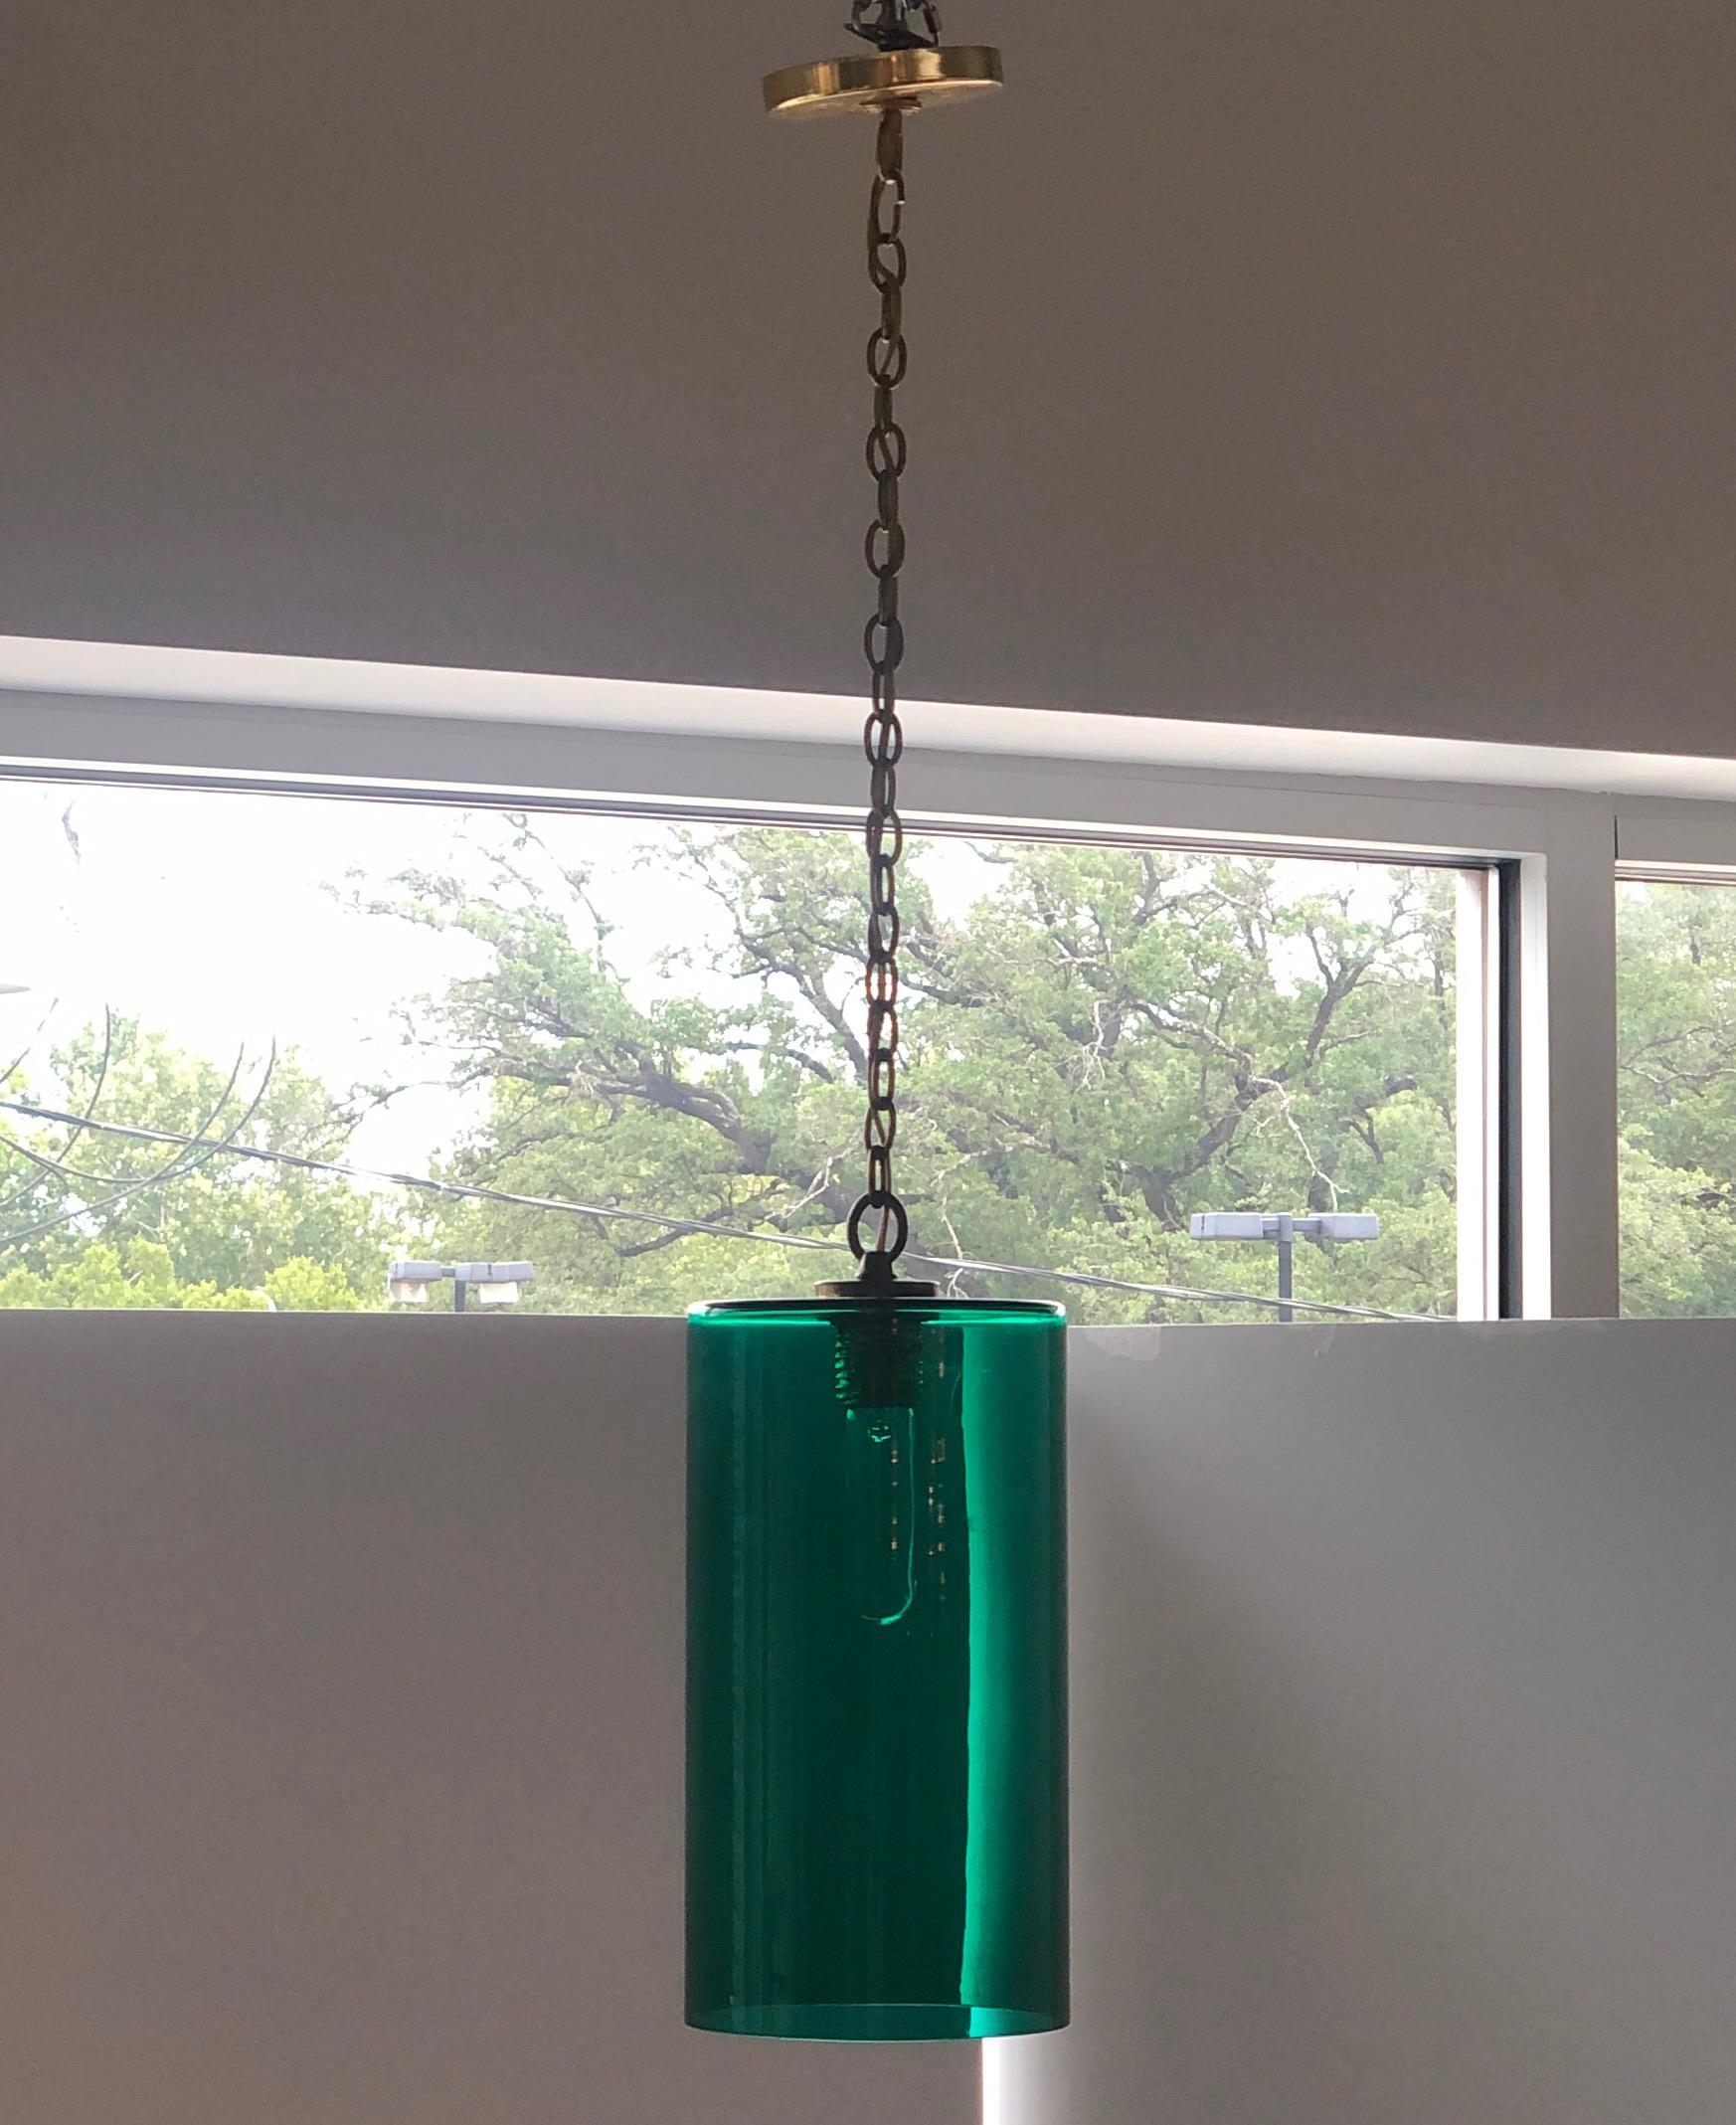 Offered is a Mid-Century Modern Italian cylindrical Murano glass with brass accents pendant / chandelier in a rich emerald green. This piece is clean, simple, Classic and quite versatile. It would look lovely in a foyer, powder room, nursery,